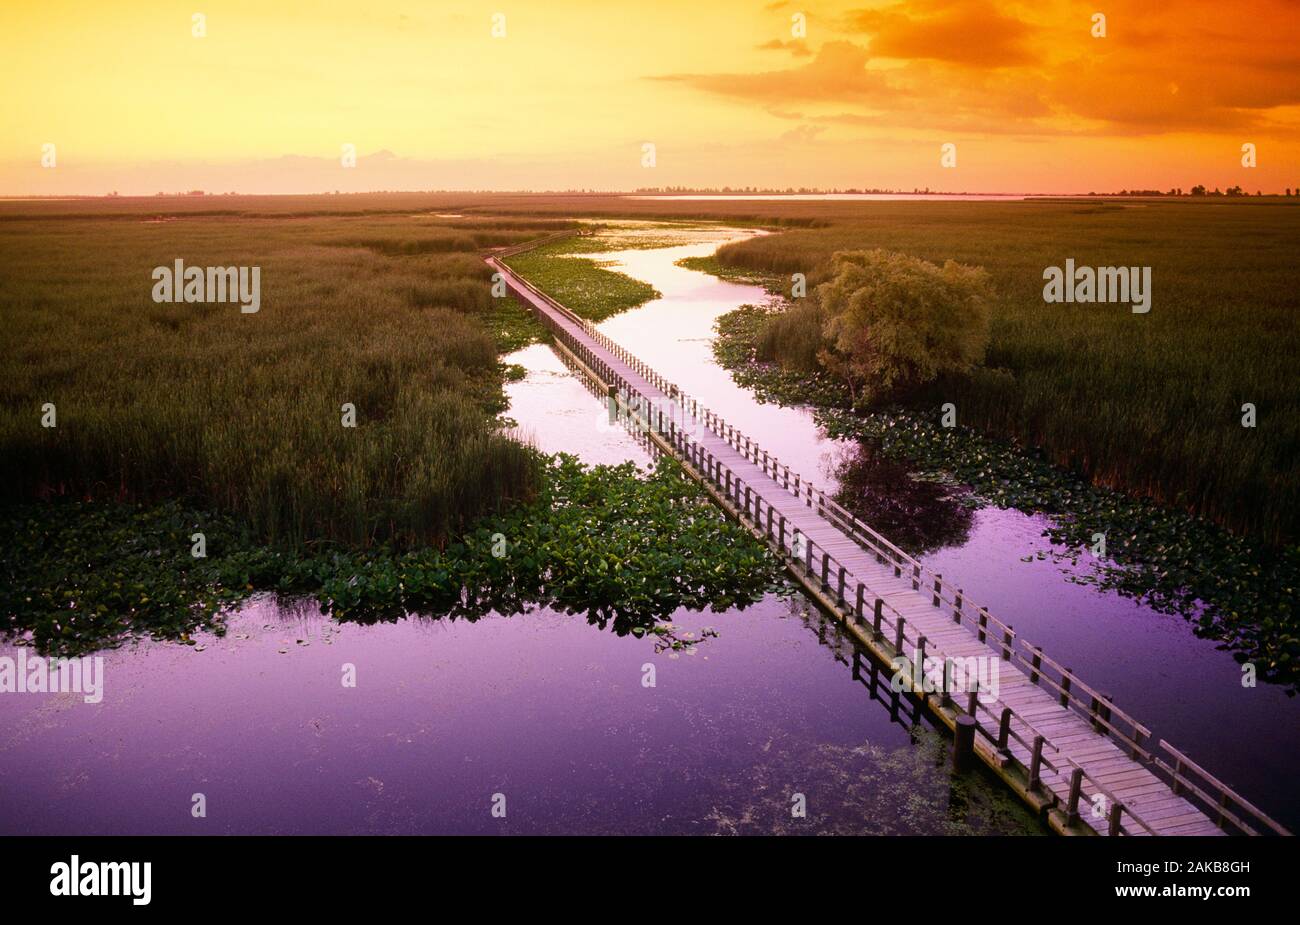 Aerial view of landscape with boardwalk in marsh at sunset, Point Pelee National Park, Ontario, Canada Stock Photo